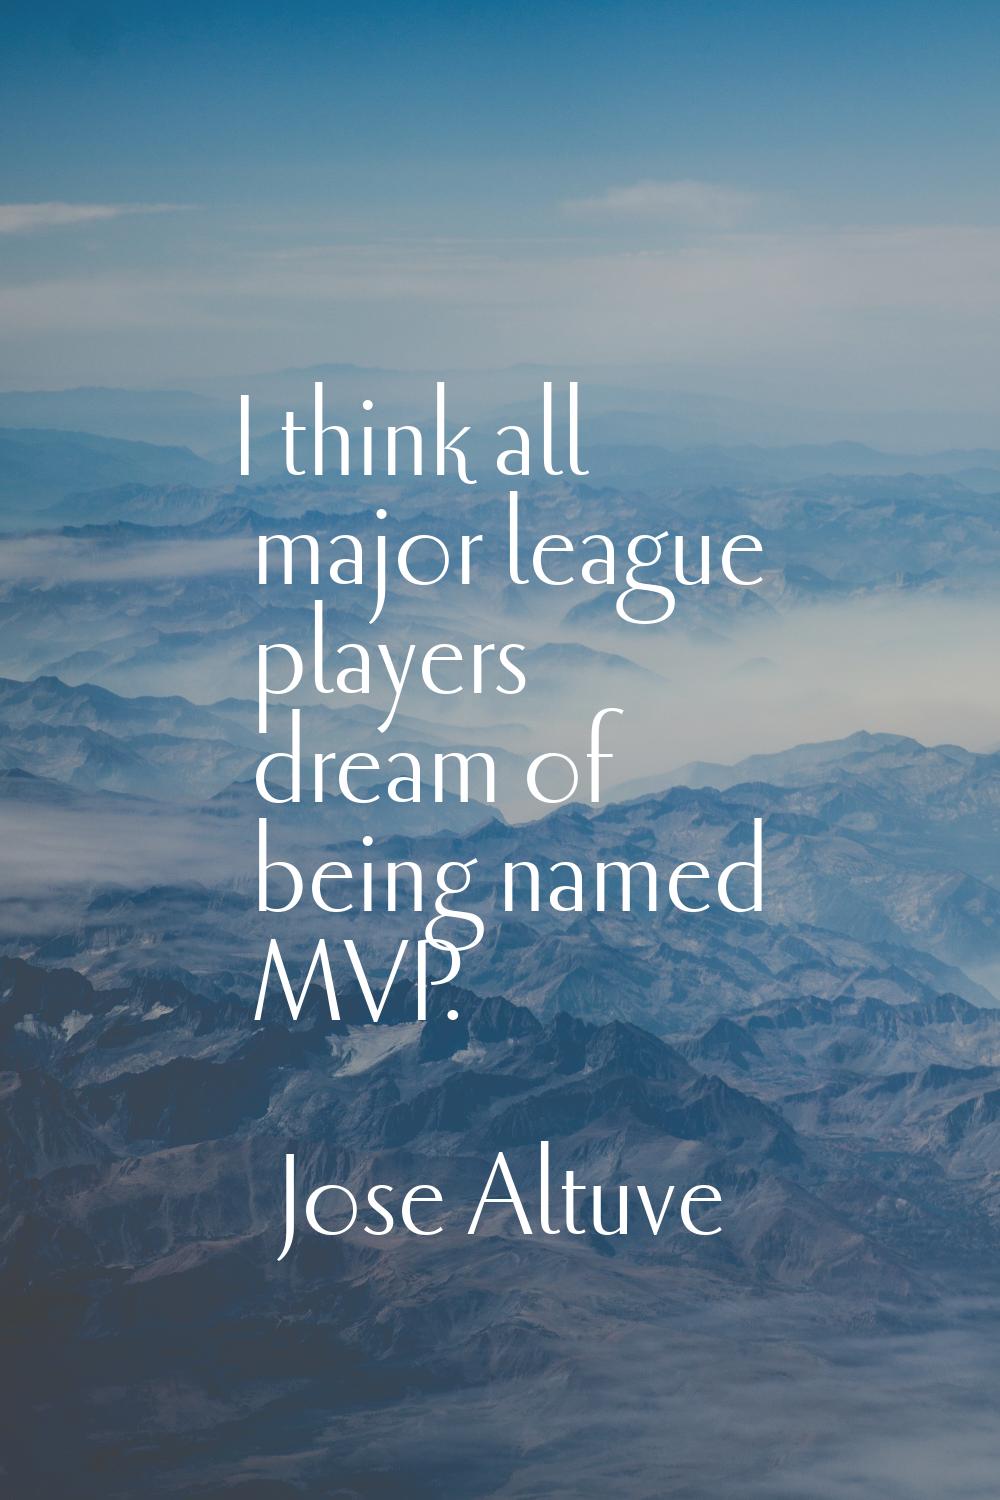 I think all major league players dream of being named MVP.